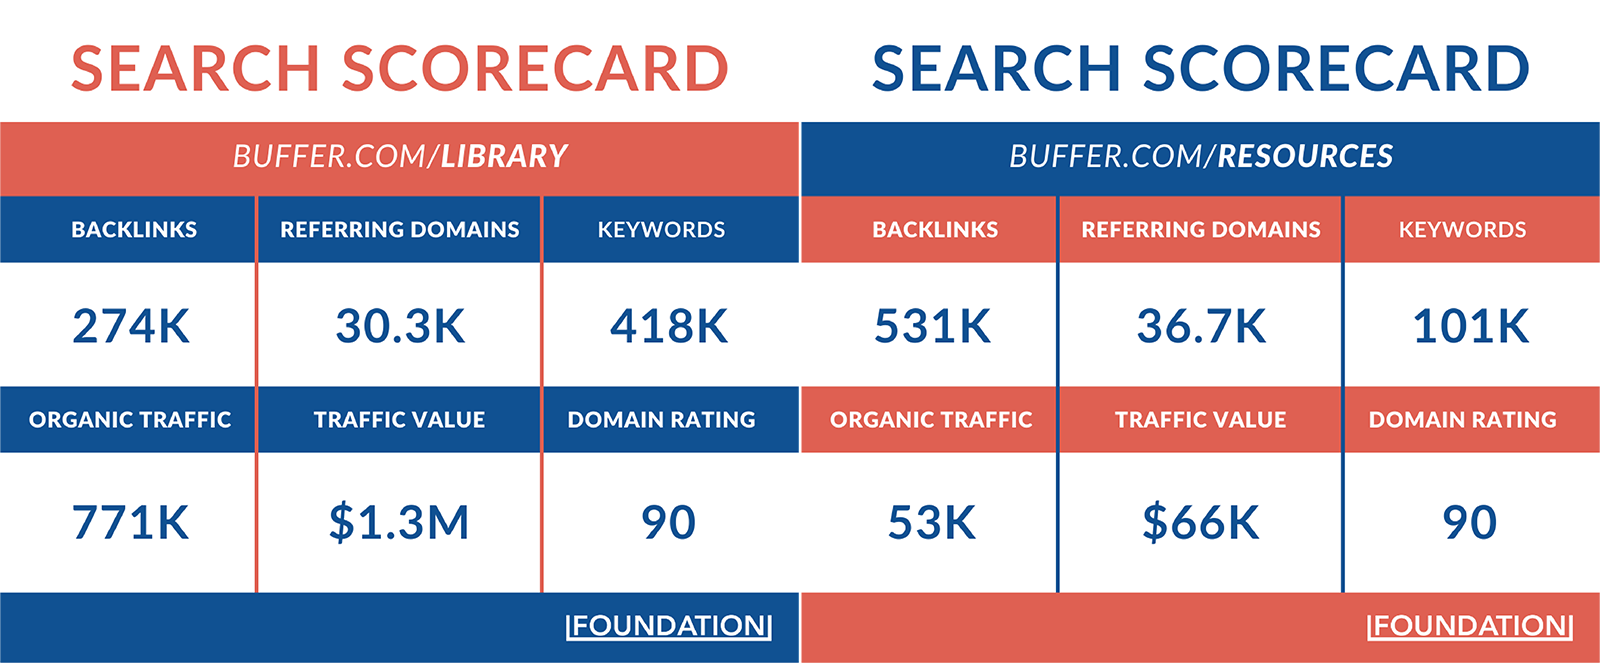 search scorecard for buffer library and resources